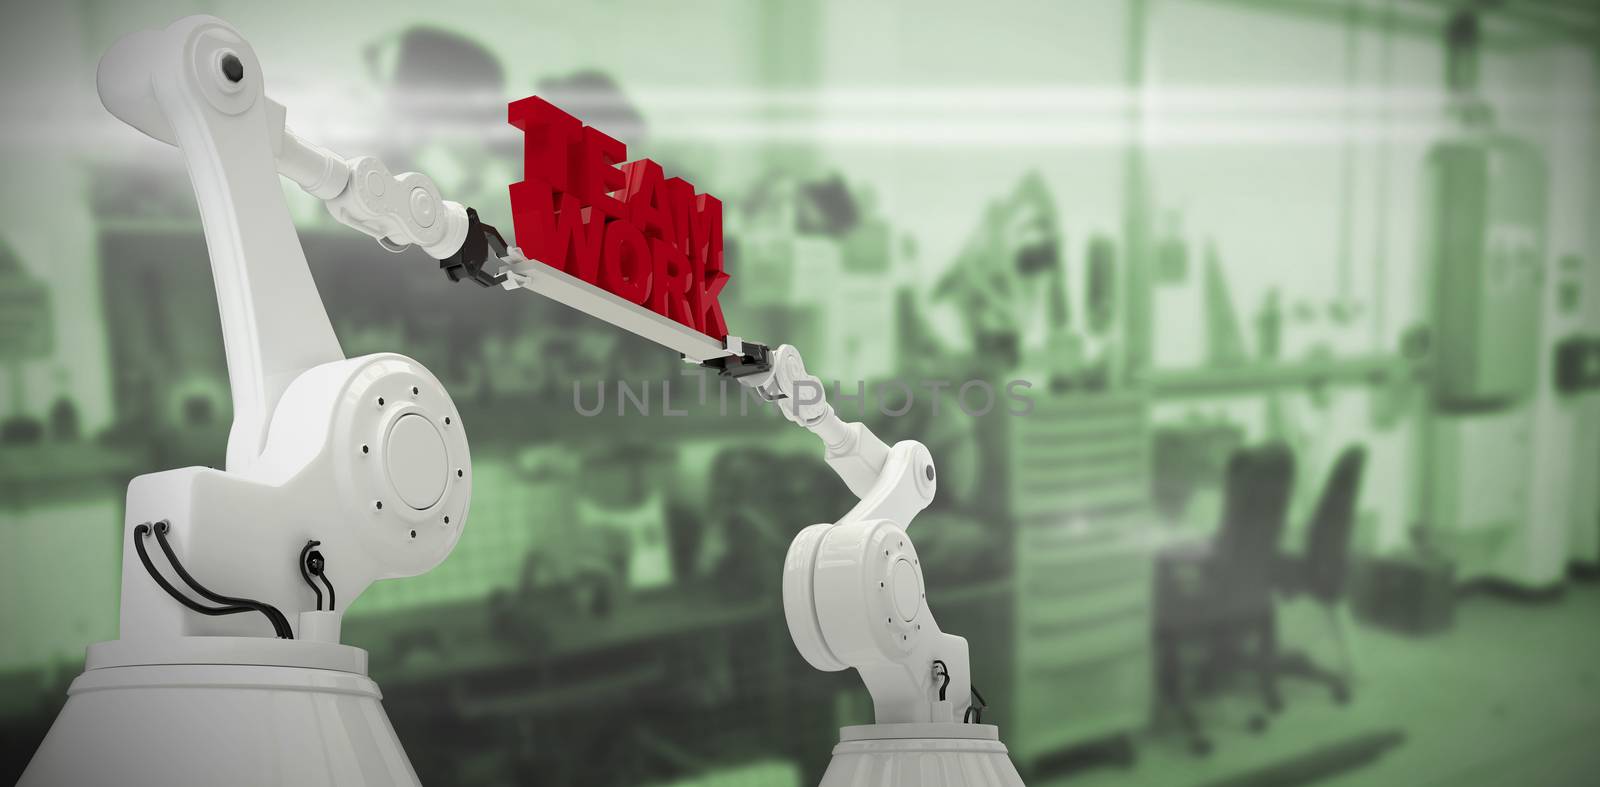 Composite image of low angle view of white robotic hand holding team work text by Wavebreakmedia